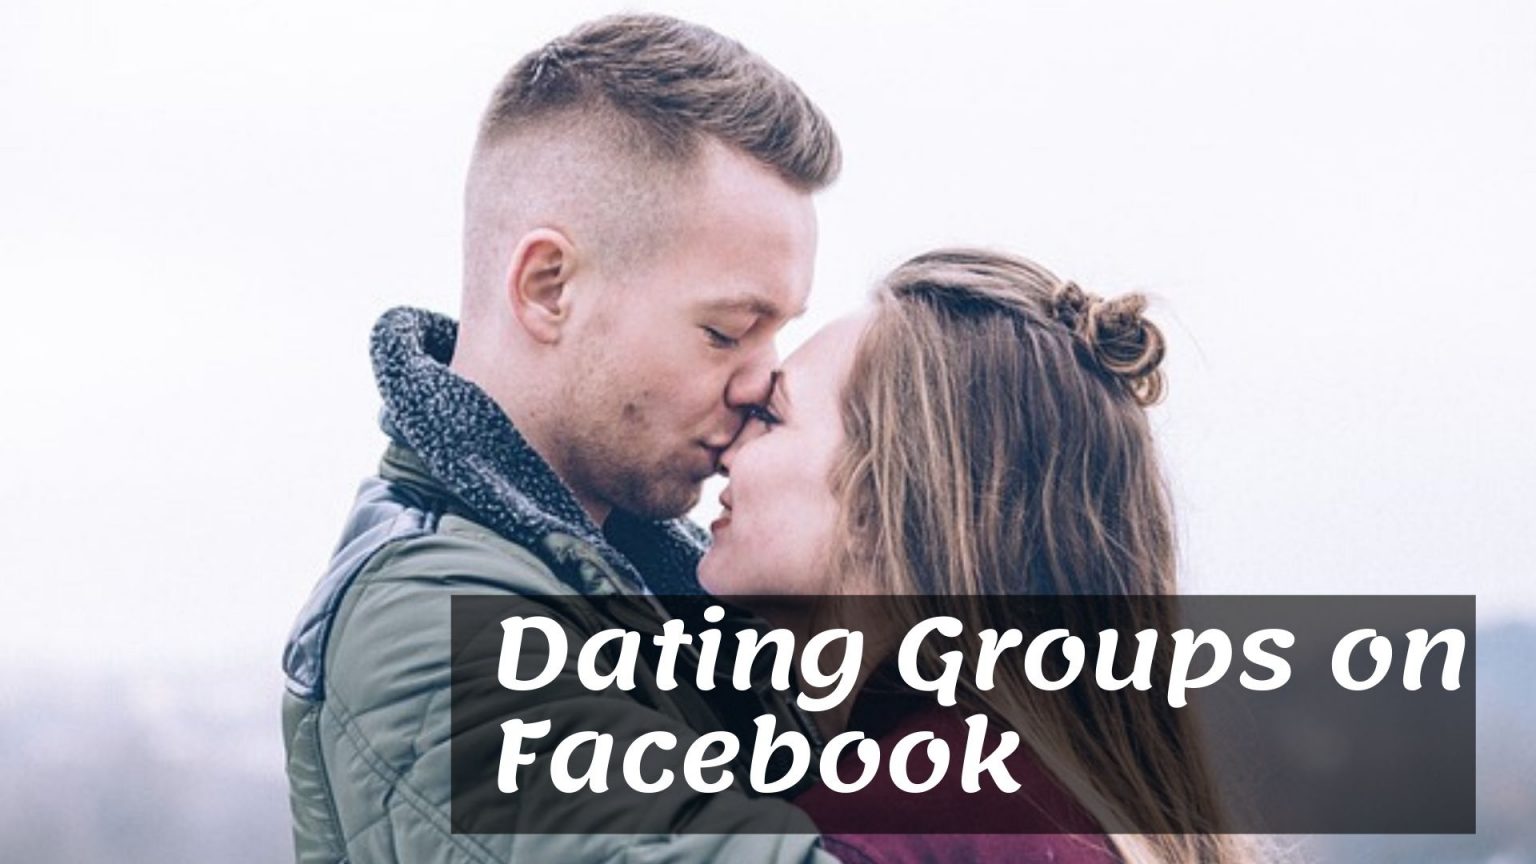 facebook dating group in common